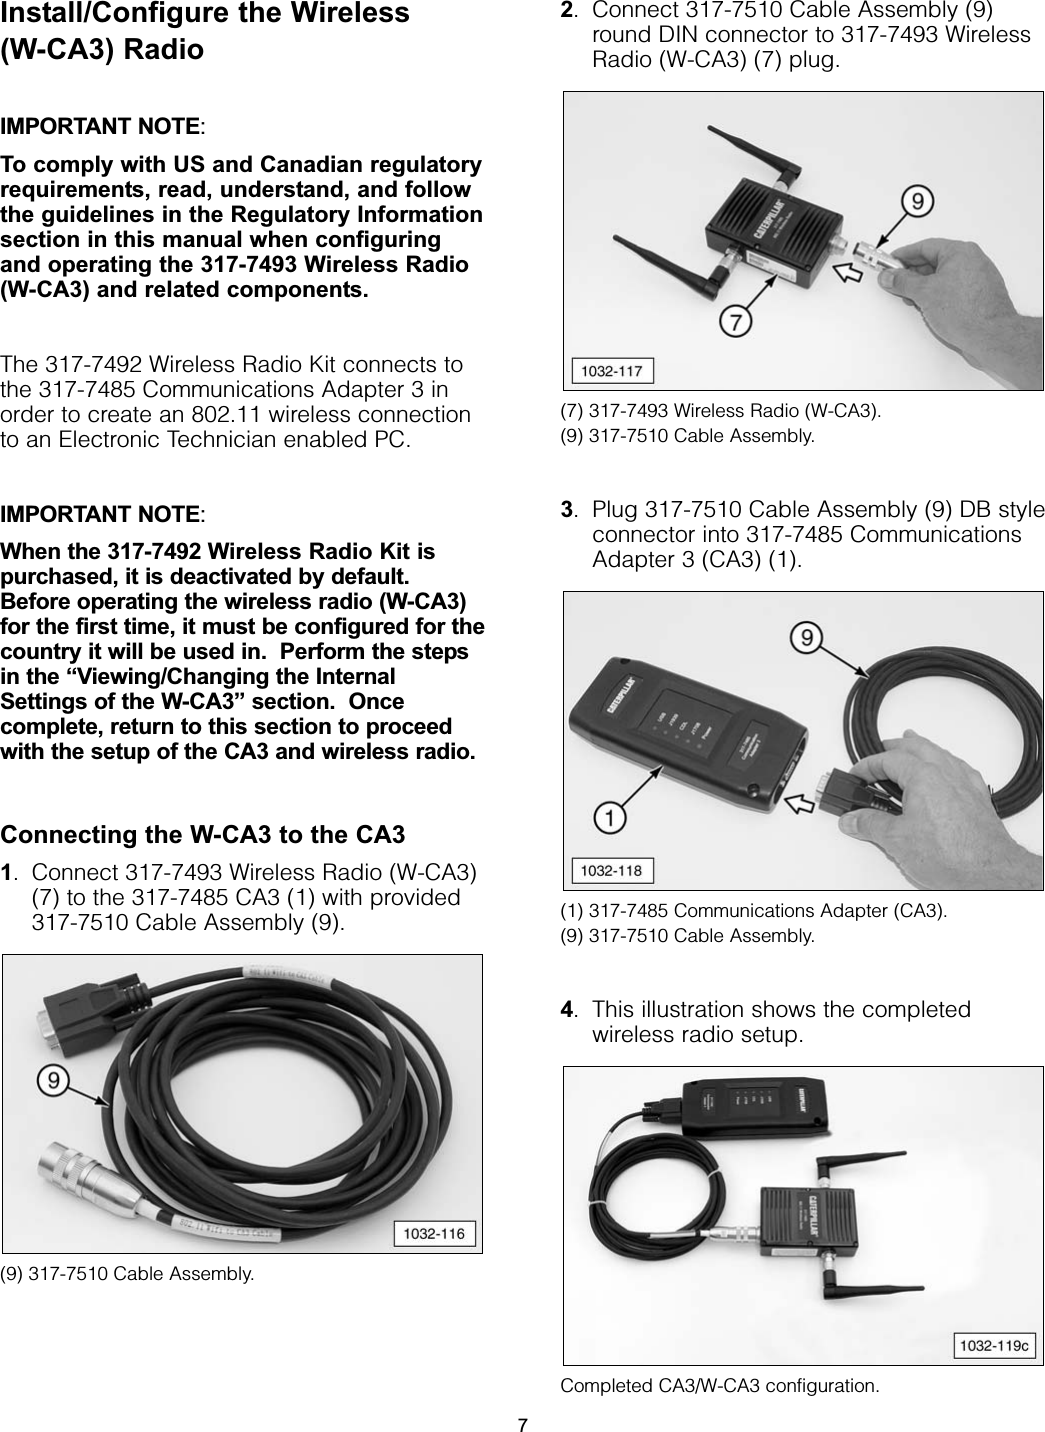 Install/Configure the Wireless(W-CA3) Radio IMPORTANT NOTE:To comply with US and Canadian regulatoryrequirements, read, understand, and followthe guidelines in the Regulatory Informationsection in this manual when configuringand operating the 317-7493 Wireless Radio(W-CA3) and related components.The 317-7492 Wireless Radio Kit connects tothe 317-7485 Communications Adapter 3 inorder to create an 802.11 wireless connectionto an Electronic Technician enabled PC.IMPORTANT NOTE:When the 317-7492 Wireless Radio Kit ispurchased, it is deactivated by default.Before operating the wireless radio (W-CA3)for the first time, it must be configured for thecountry it will be used in.  Perform the stepsin the “Viewing/Changing the InternalSettings of the W-CA3” section.  Oncecomplete, return to this section to proceedwith the setup of the CA3 and wireless radio.Connecting the W-CA3 to the CA31. Connect 317-7493 Wireless Radio (W-CA3)(7) to the 317-7485 CA3 (1) with provided317-7510 Cable Assembly (9).(9) 317-7510 Cable Assembly.2. Connect 317-7510 Cable Assembly (9)round DIN connector to 317-7493 WirelessRadio (W-CA3) (7) plug.(7) 317-7493 Wireless Radio (W-CA3).  (9) 317-7510 Cable Assembly.3. Plug 317-7510 Cable Assembly (9) DB styleconnector into 317-7485 CommunicationsAdapter 3 (CA3) (1).(1) 317-7485 Communications Adapter (CA3).  (9) 317-7510 Cable Assembly.4. This illustration shows the completedwireless radio setup.Completed CA3/W-CA3 configuration.7